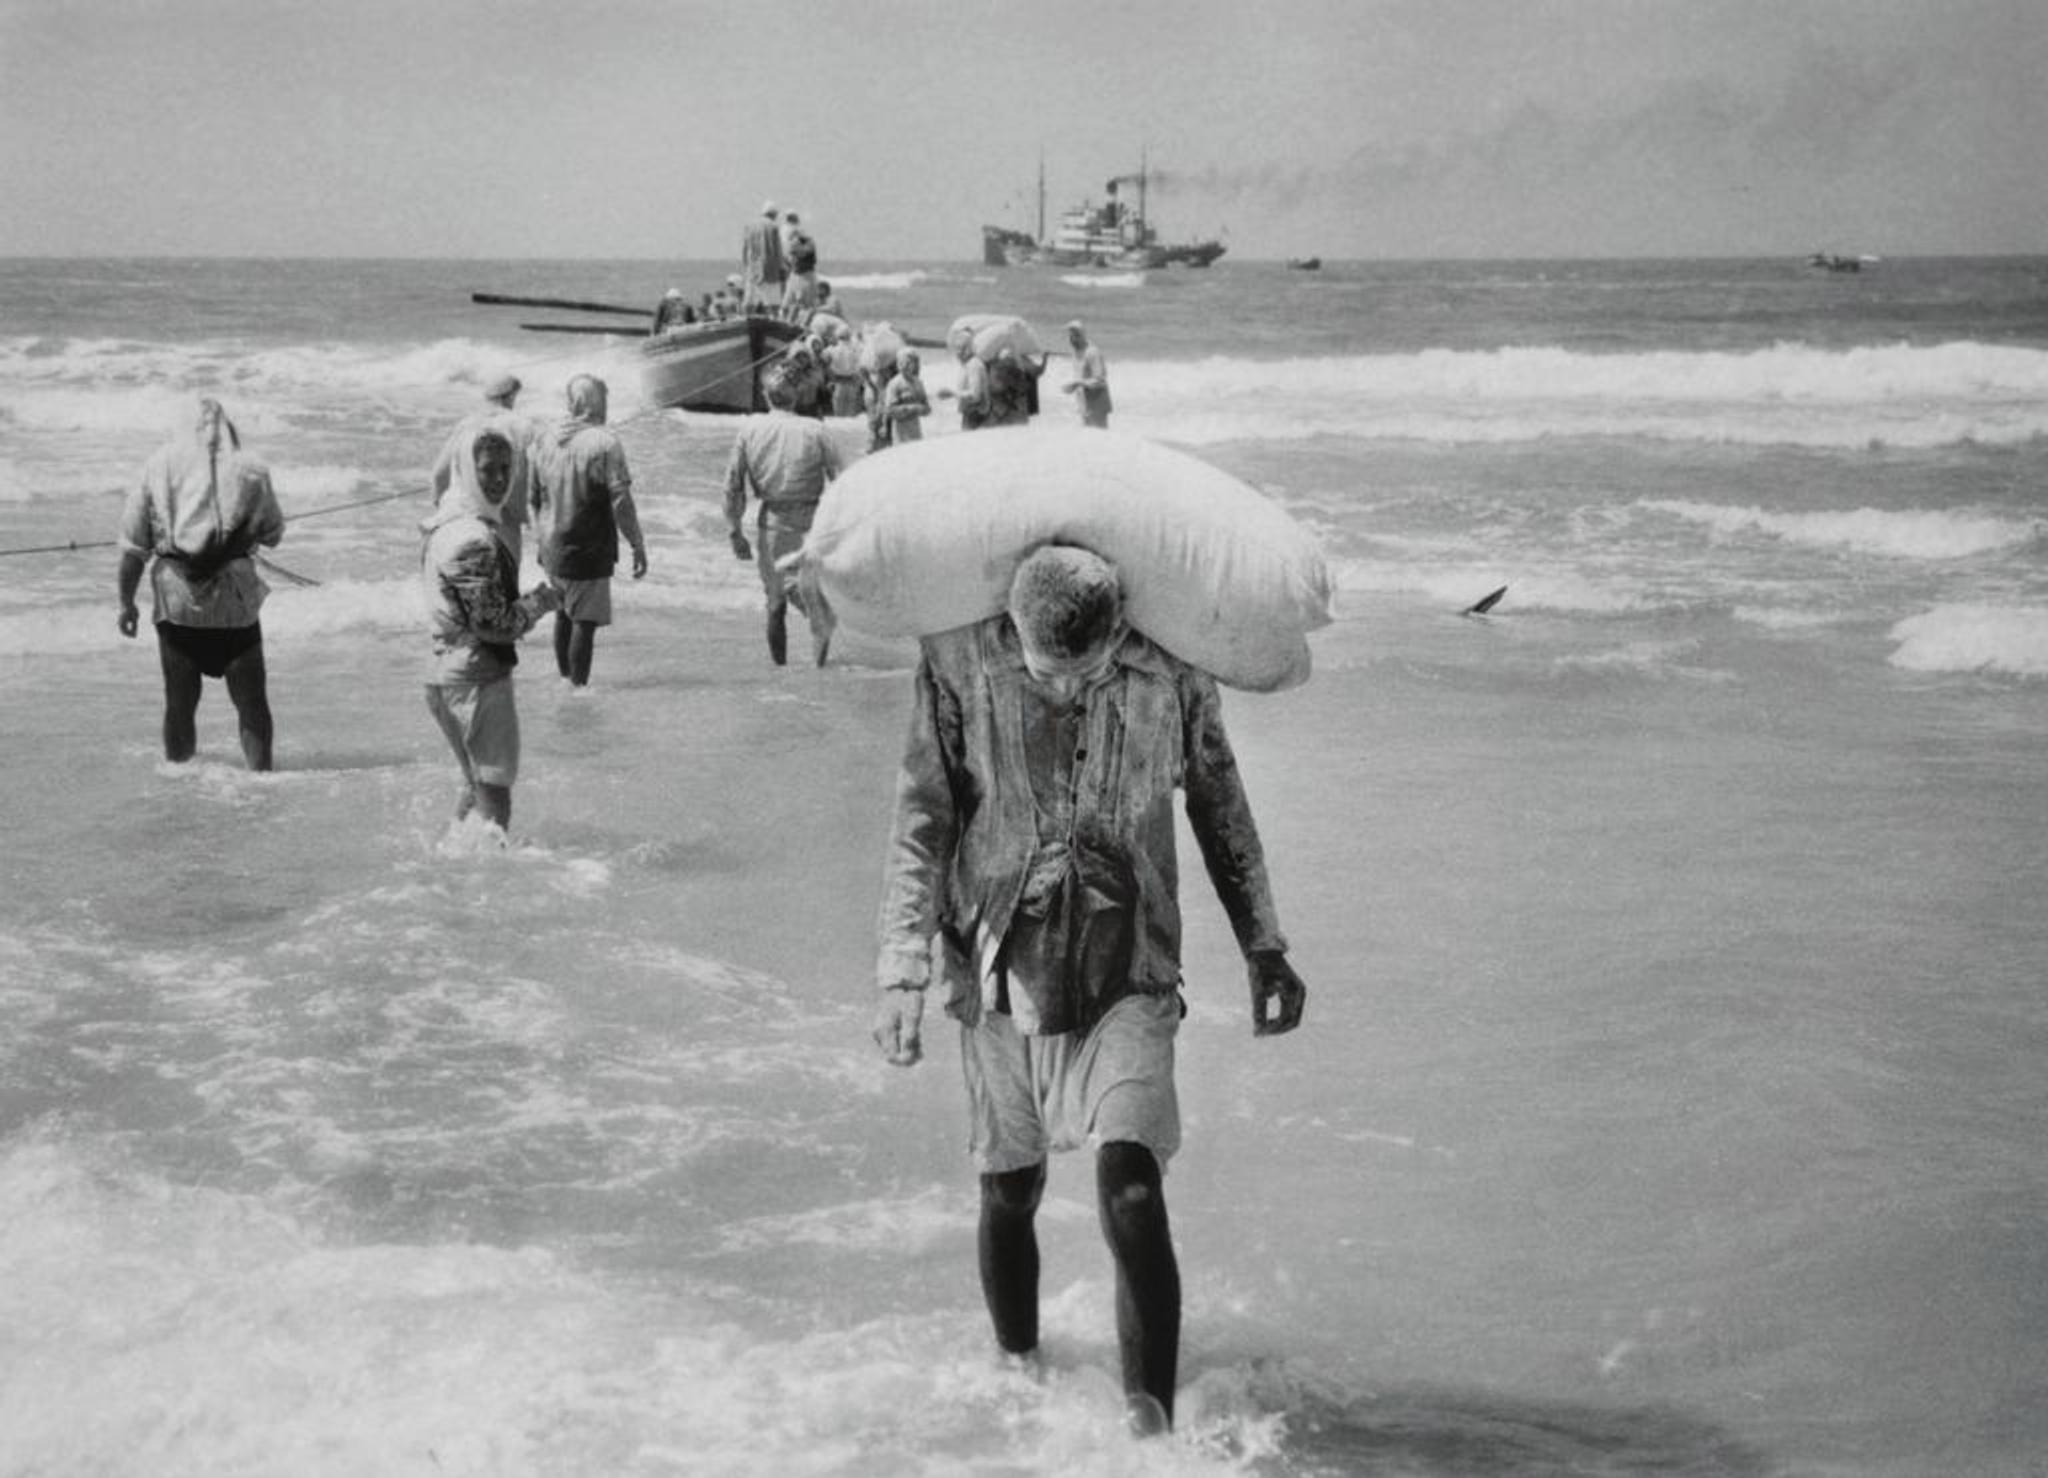 Palestinian refugees on the Gaza strip, carrying sacks of flour sent by UNRWA, from boat to shore.